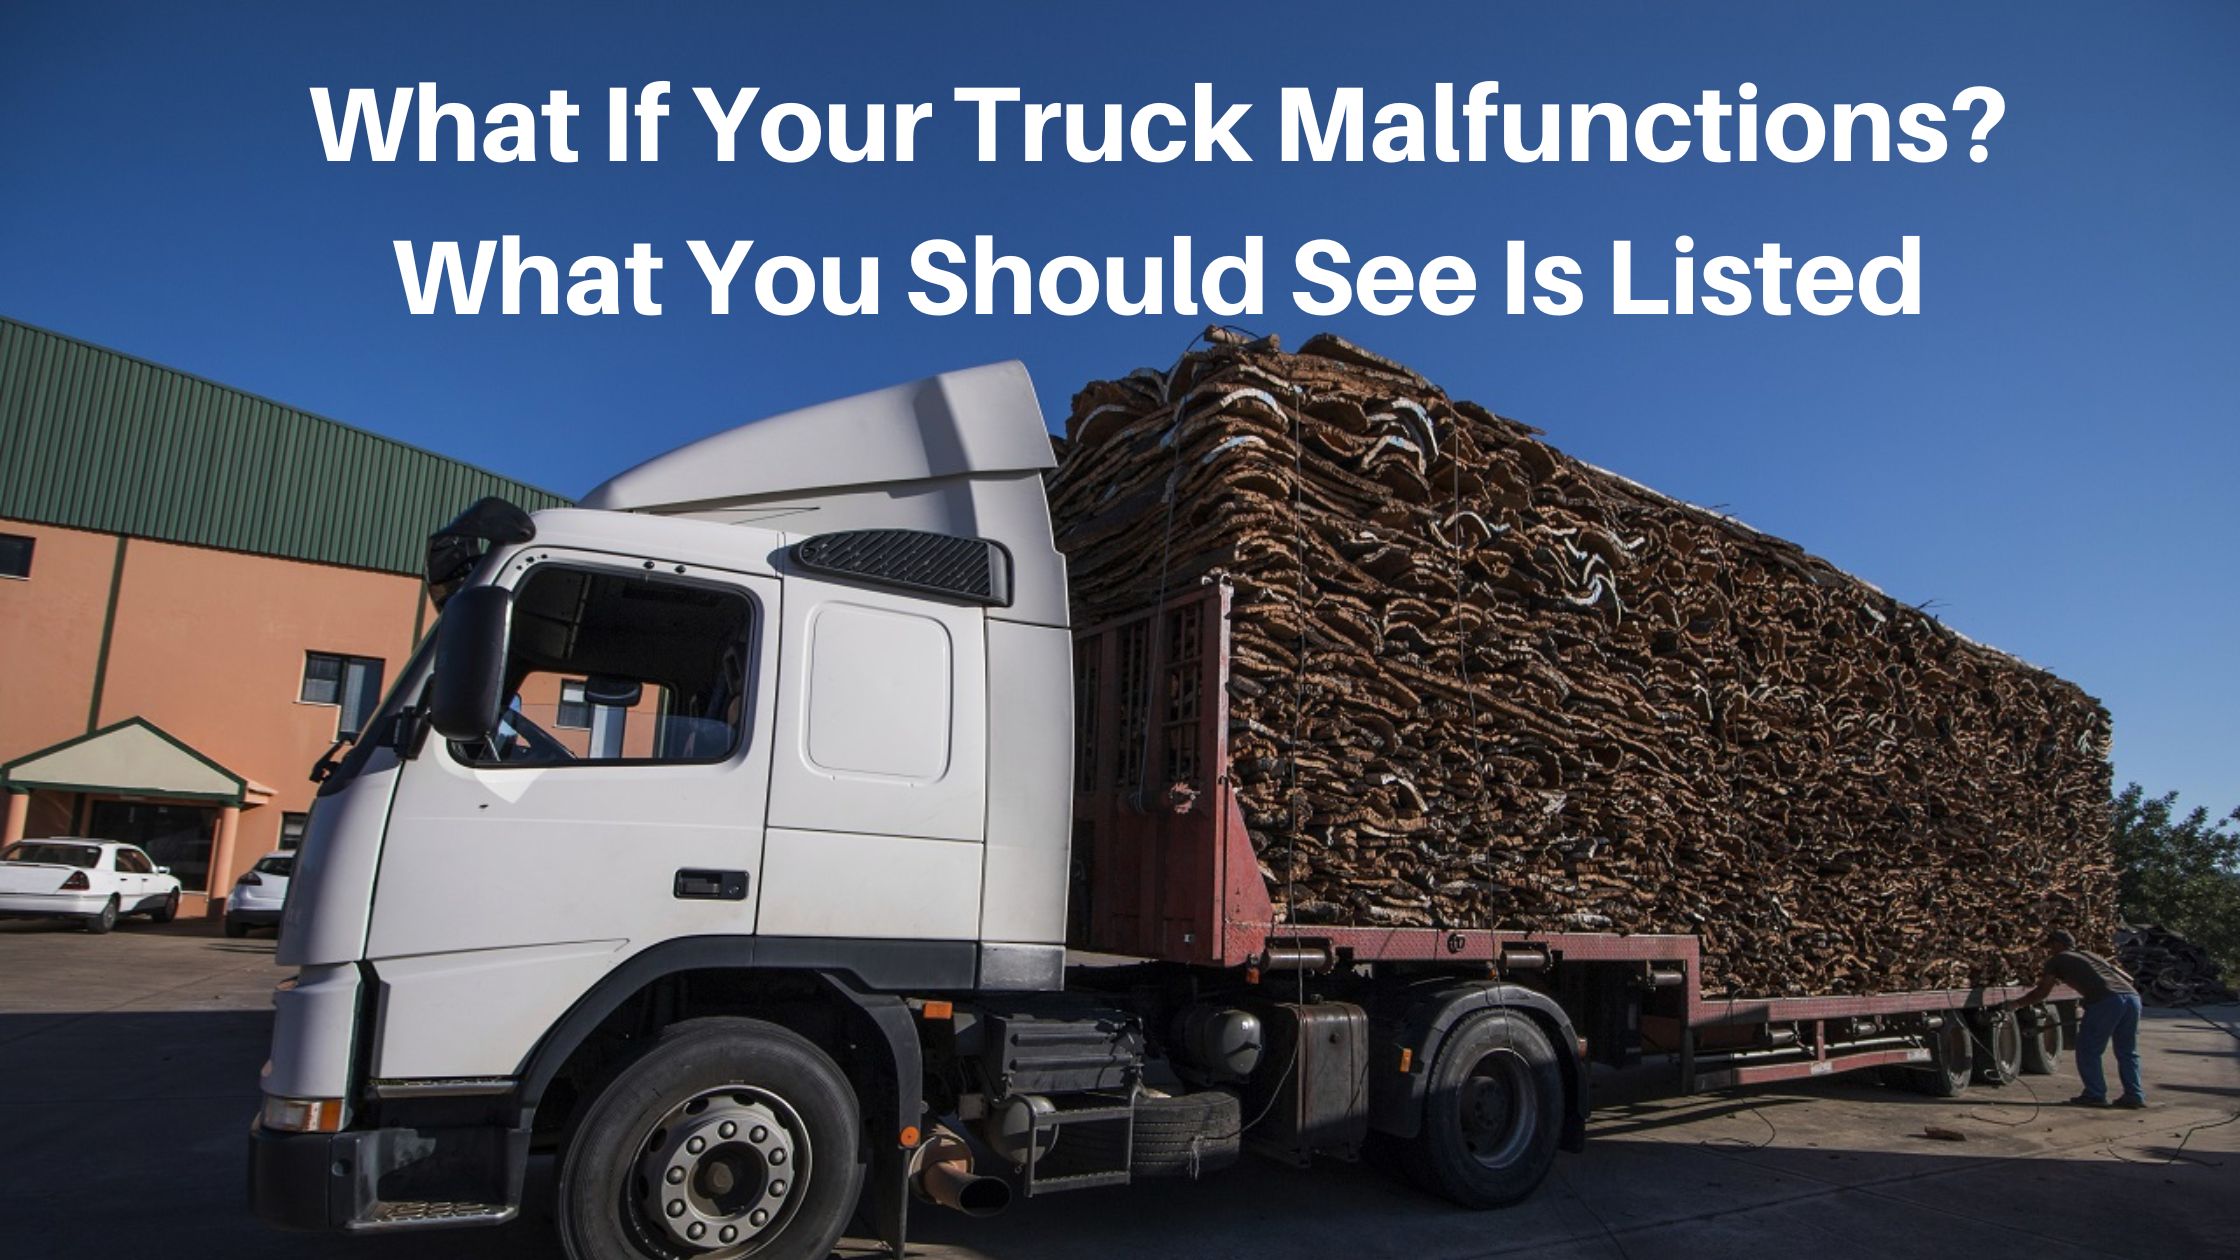 What If Your Truck Malfunctions? What You Should See Is Listed